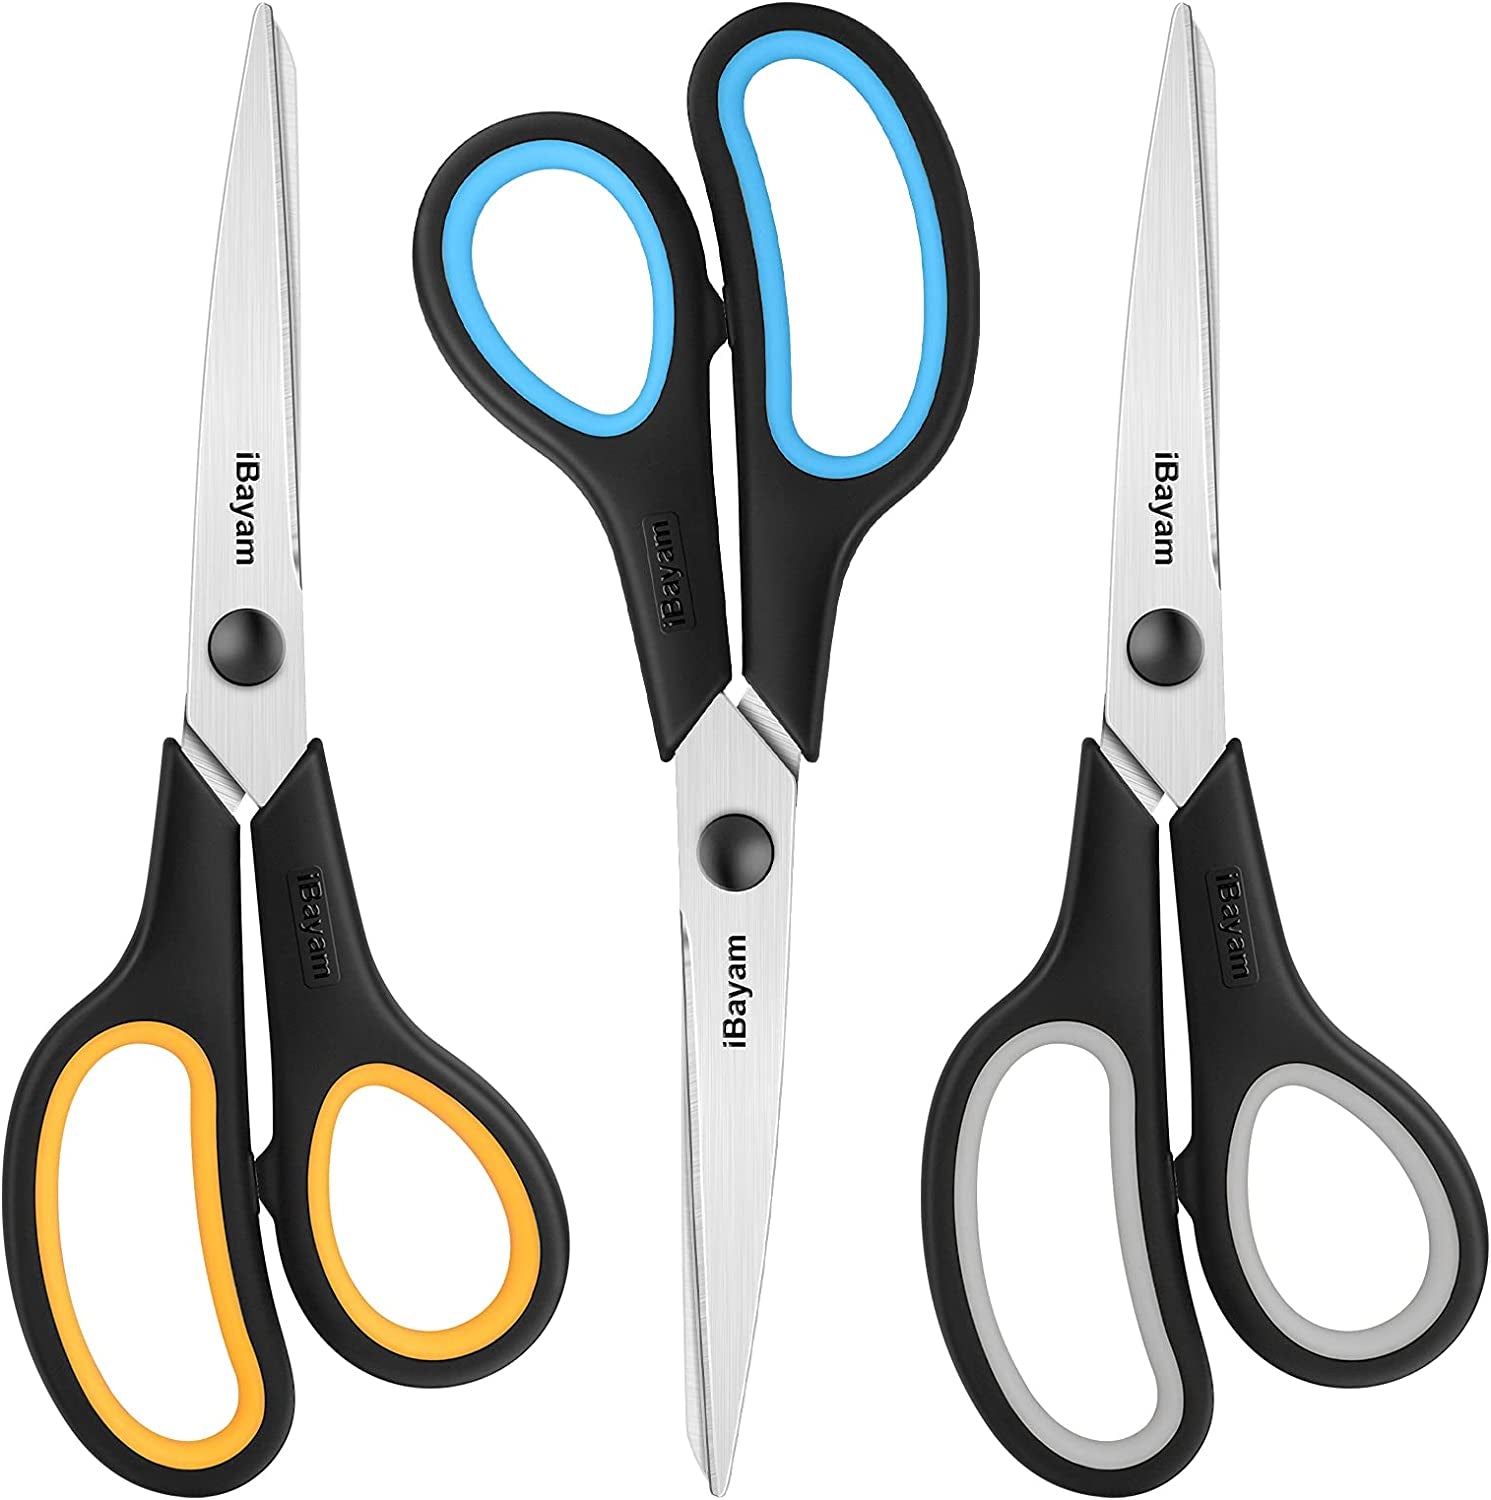 Scissors,  8" All Purpose Scissors Bulk 3-Pack, Ultra Sharp 2.5Mm Thick Blade Shears Comfort-Grip Scissors for Office Desk Accessories Sewing Fabric Home Craft School Supplies, Right/Left Handed